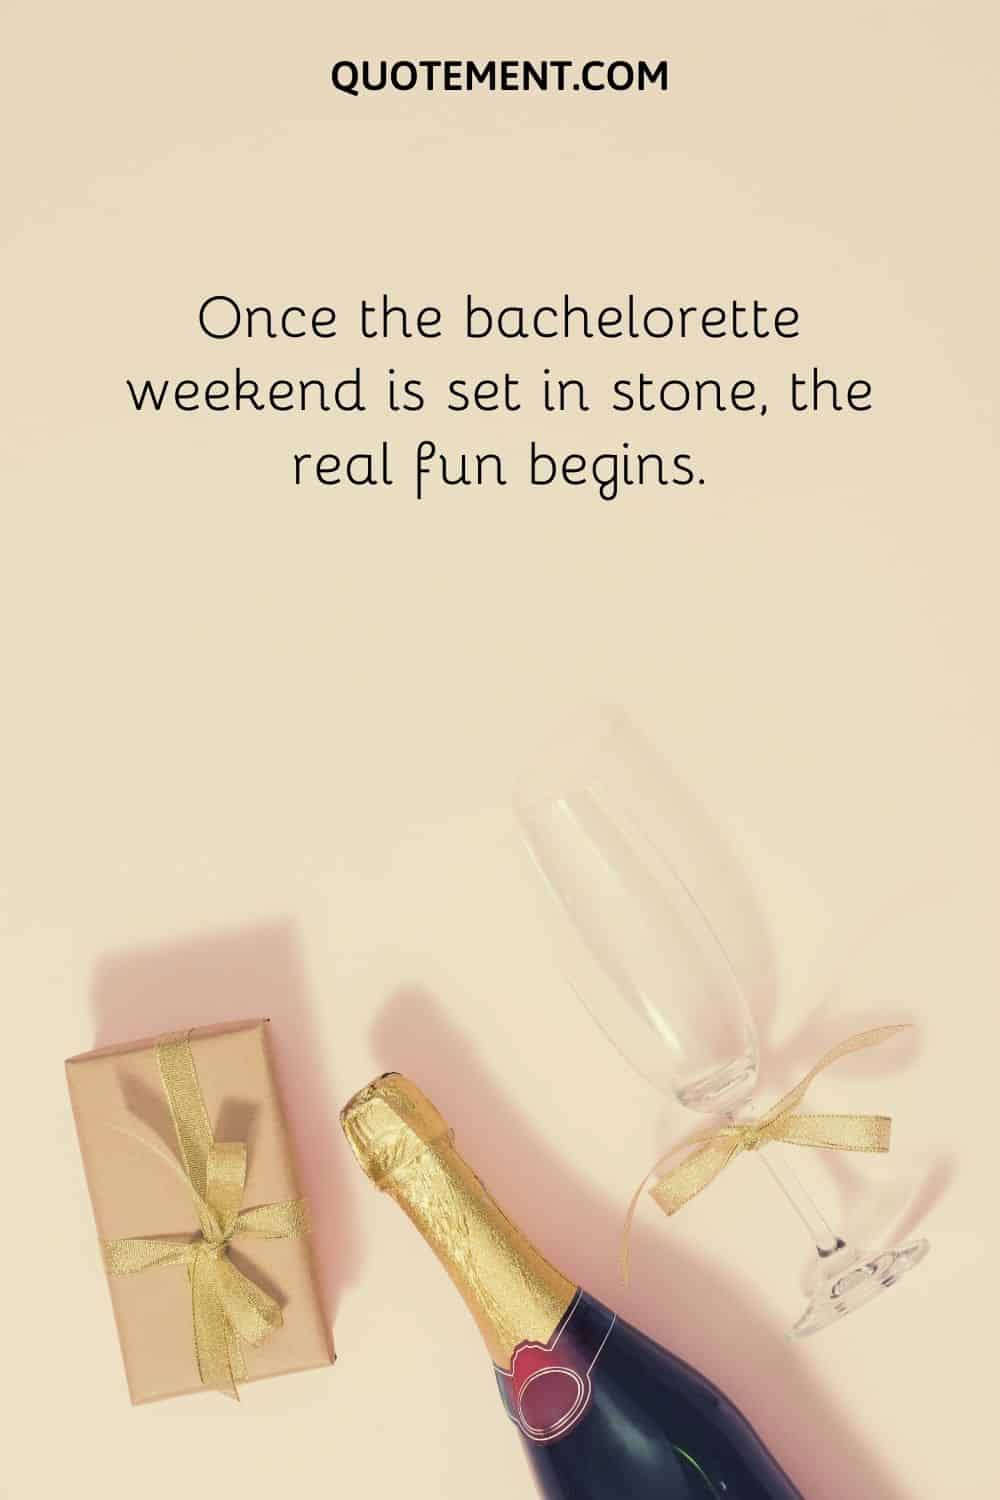 Once the bachelorette weekend is set in stone, the real fun begins